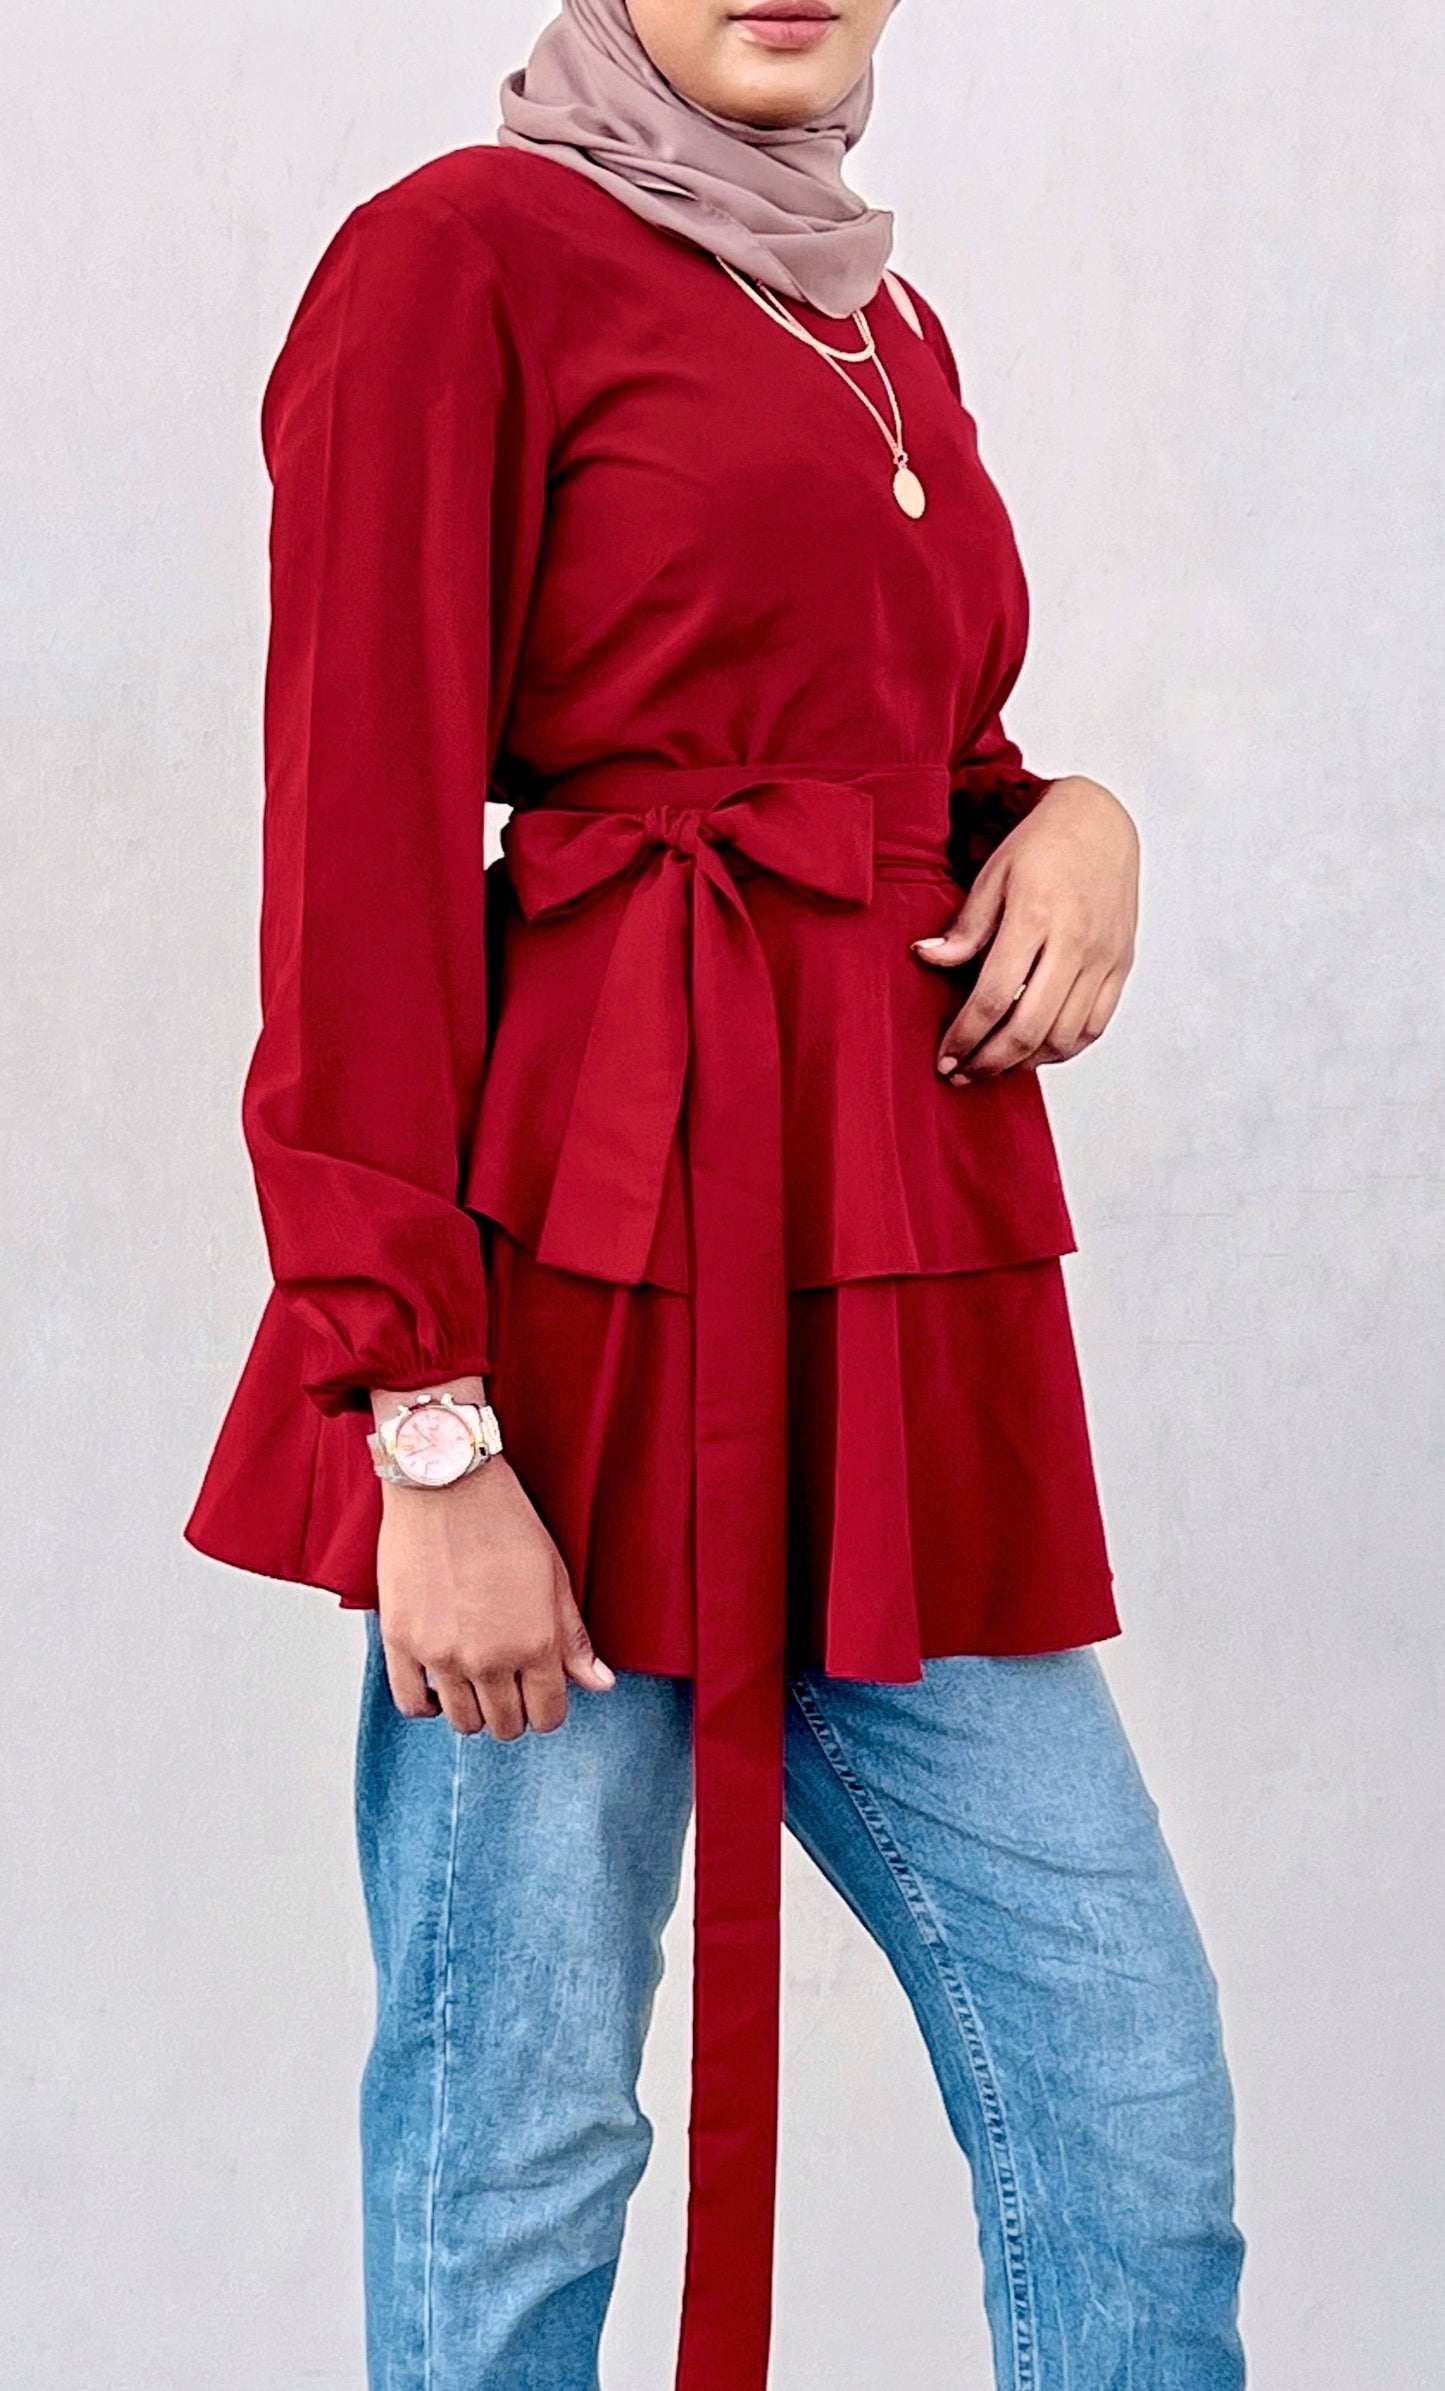 Red Layered Top with Belt